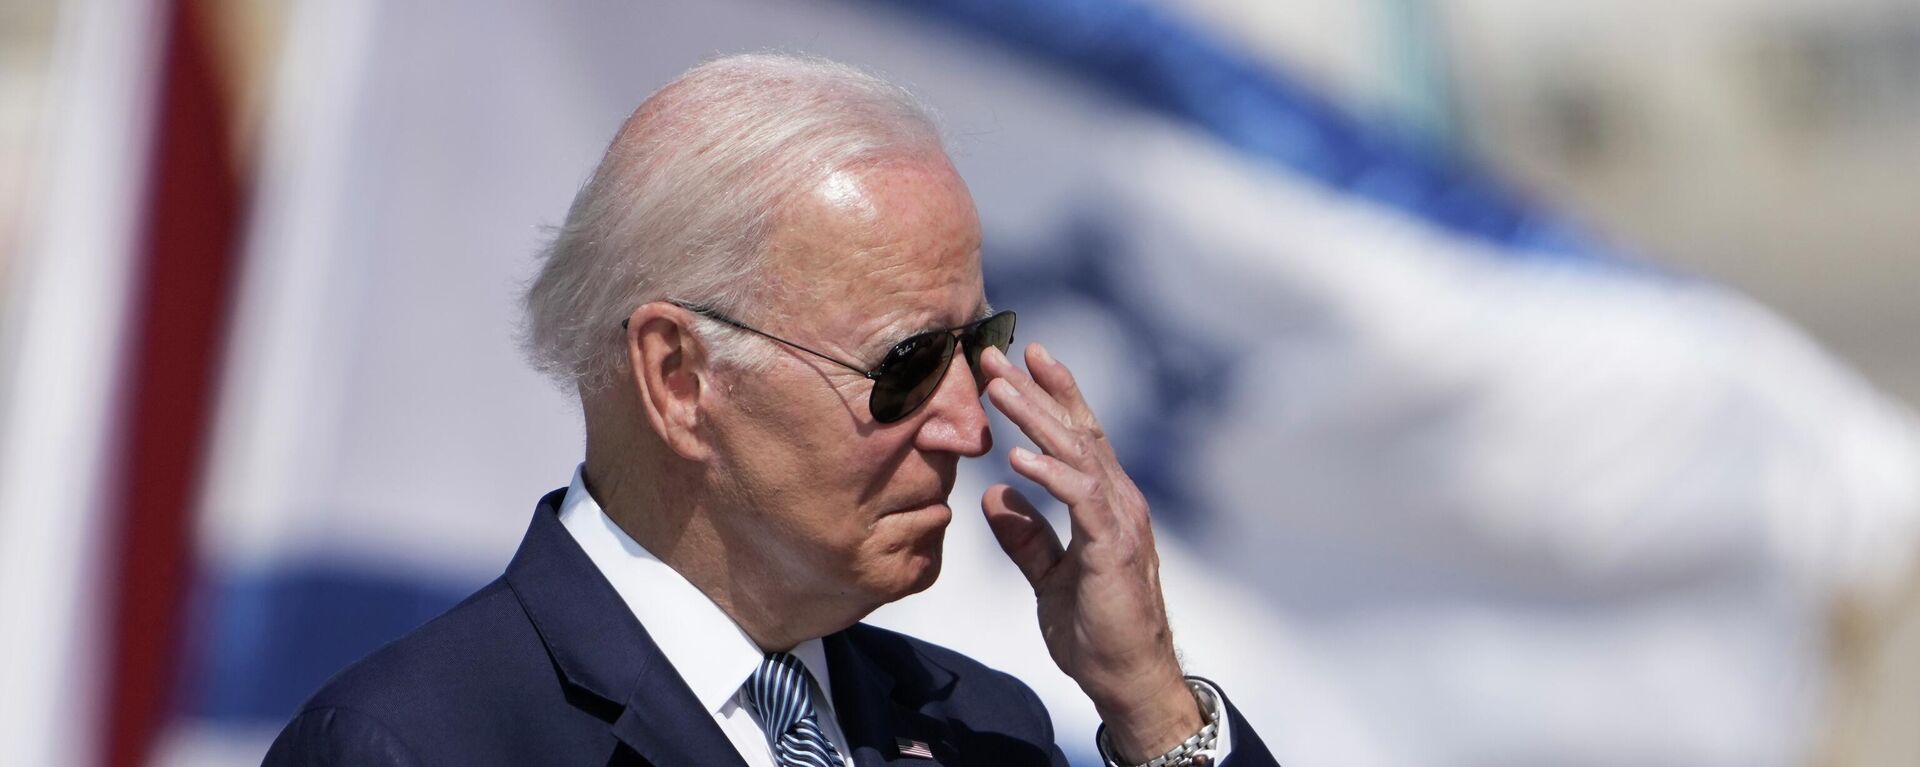 President Joe Biden adjusts his glasses during a welcoming ceremony upon his arrival at Ben Gurion International Airport near Tel Aviv, Israel Wednesday, July 13, 2022. Biden arrives in Israel on Wednesday for a three-day visit, his first as president.  - Sputnik International, 1920, 17.07.2022